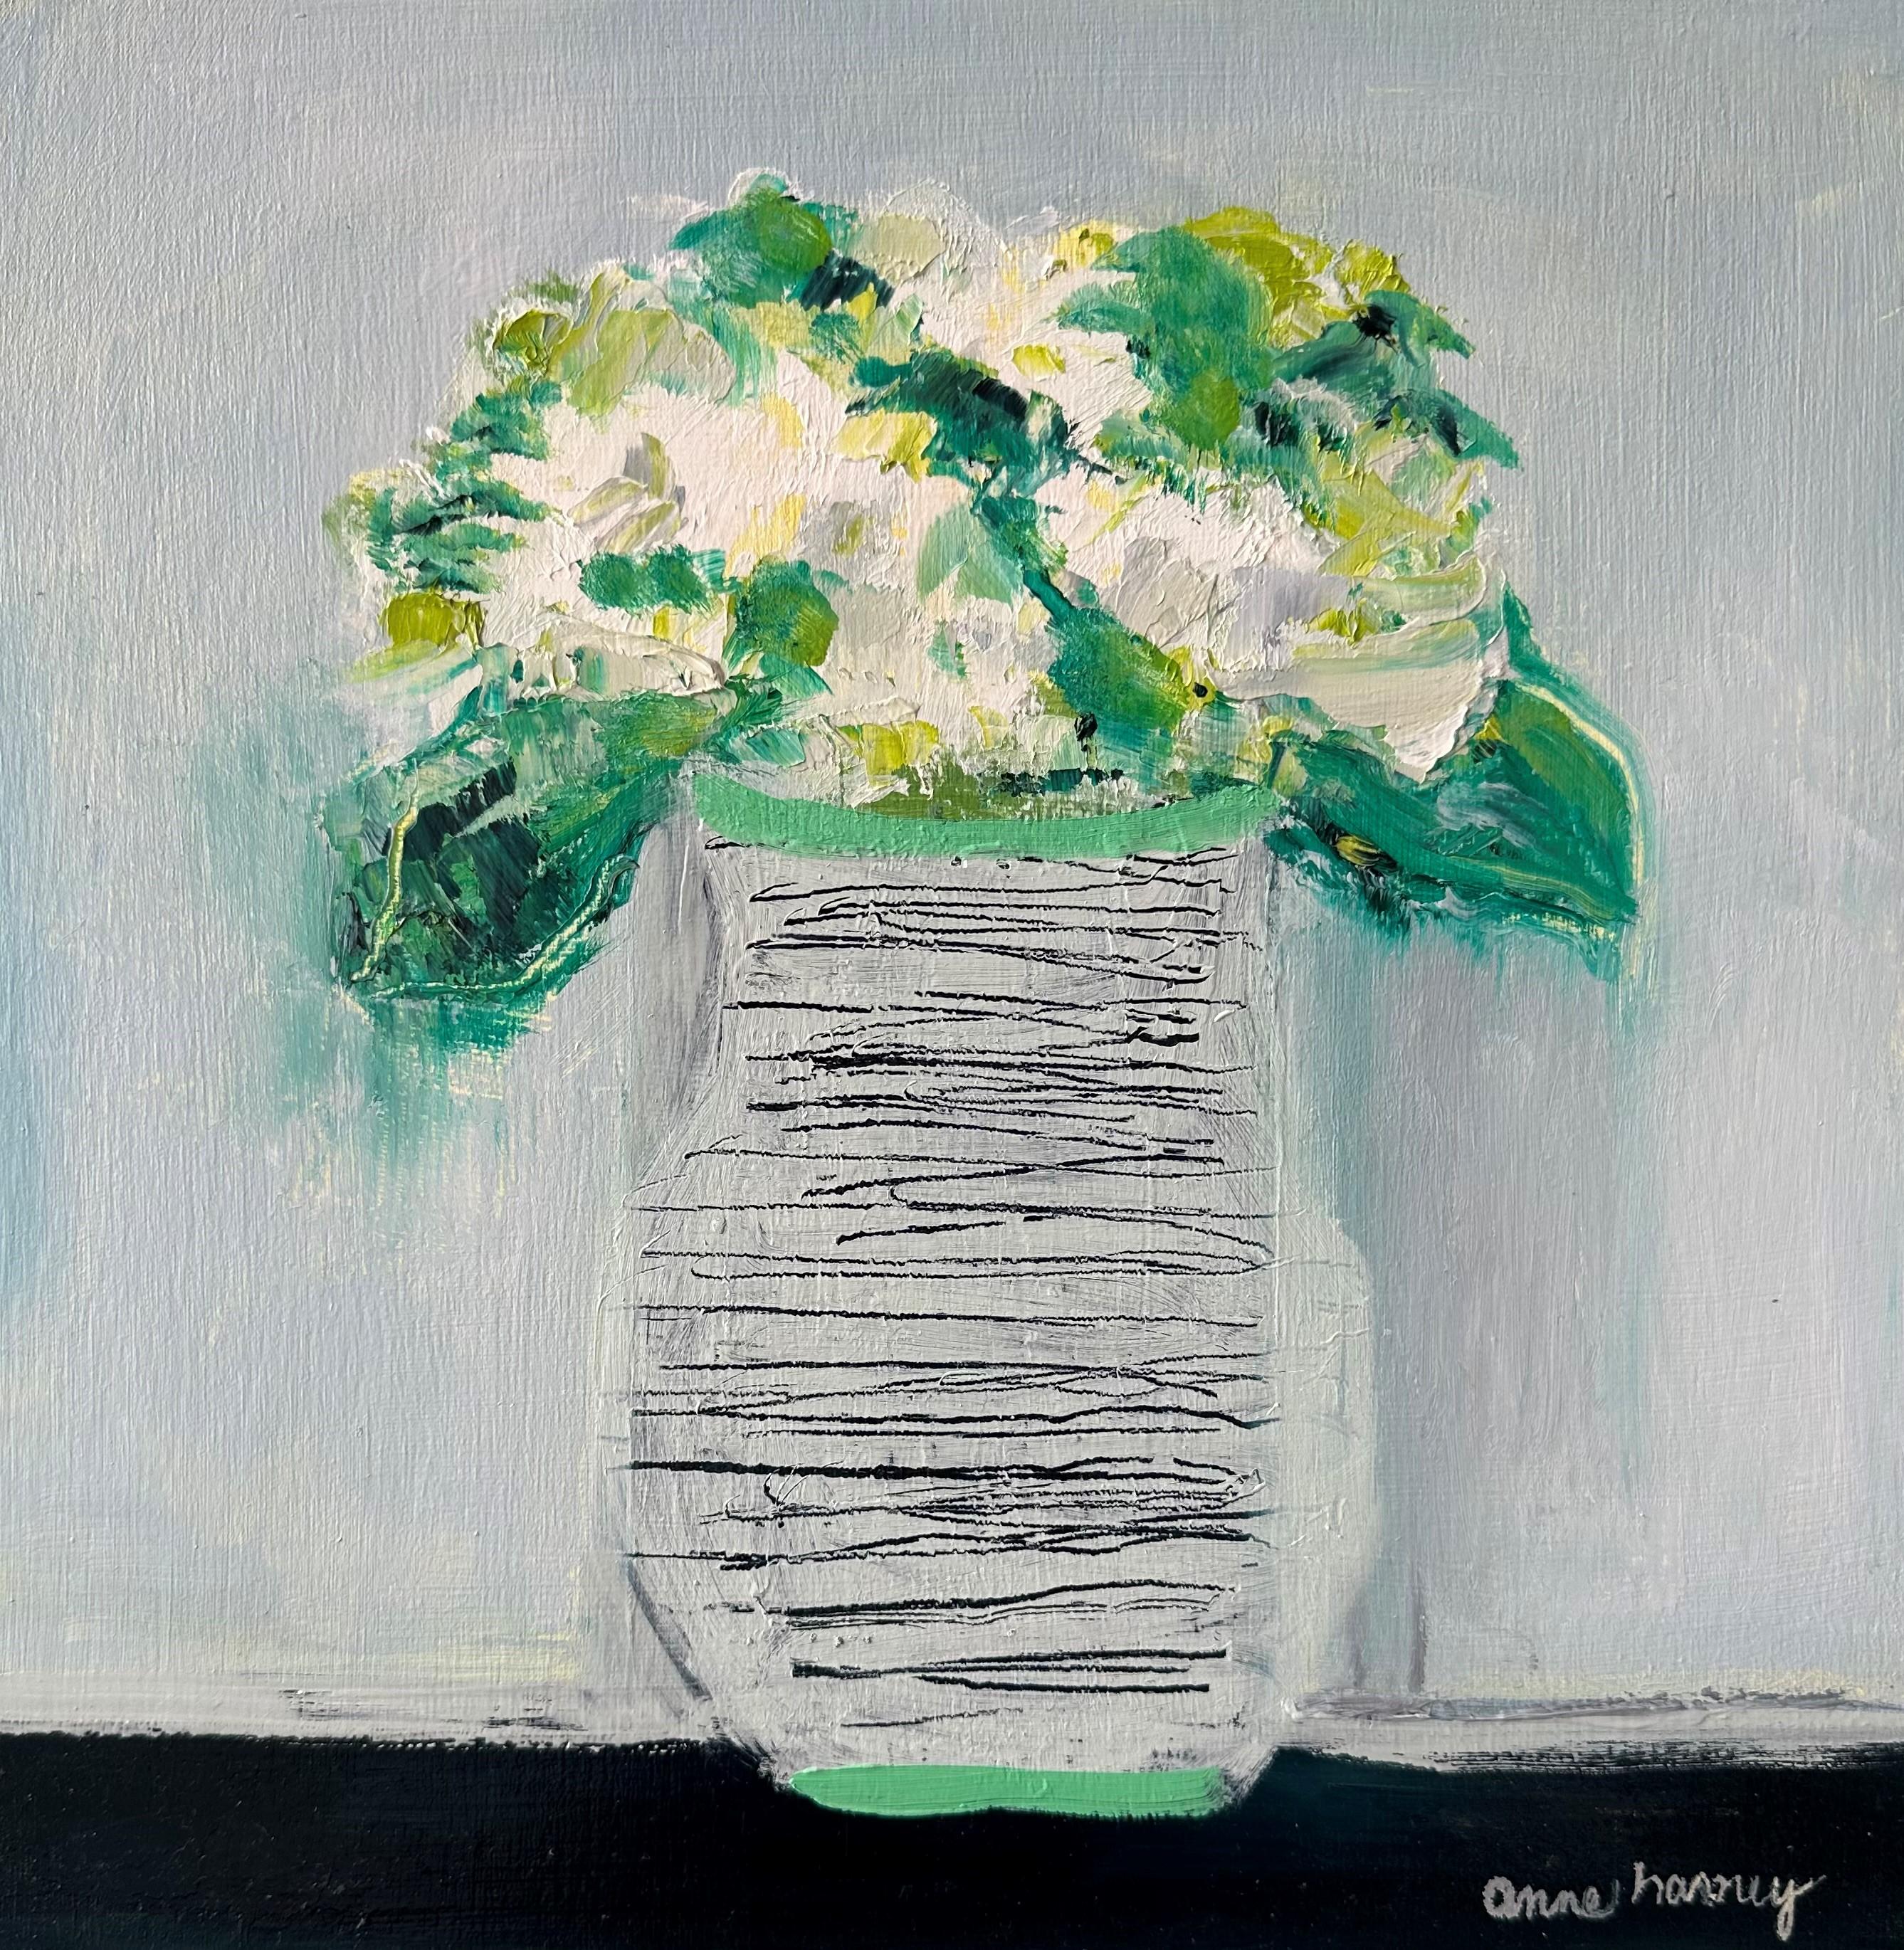 Anne Harney is a representational painter beginning her work from observation and concluding with a mix of imagination. “I prefer to begin my work from life. My landscape paintings usually follow me into the studio the following day to capture the